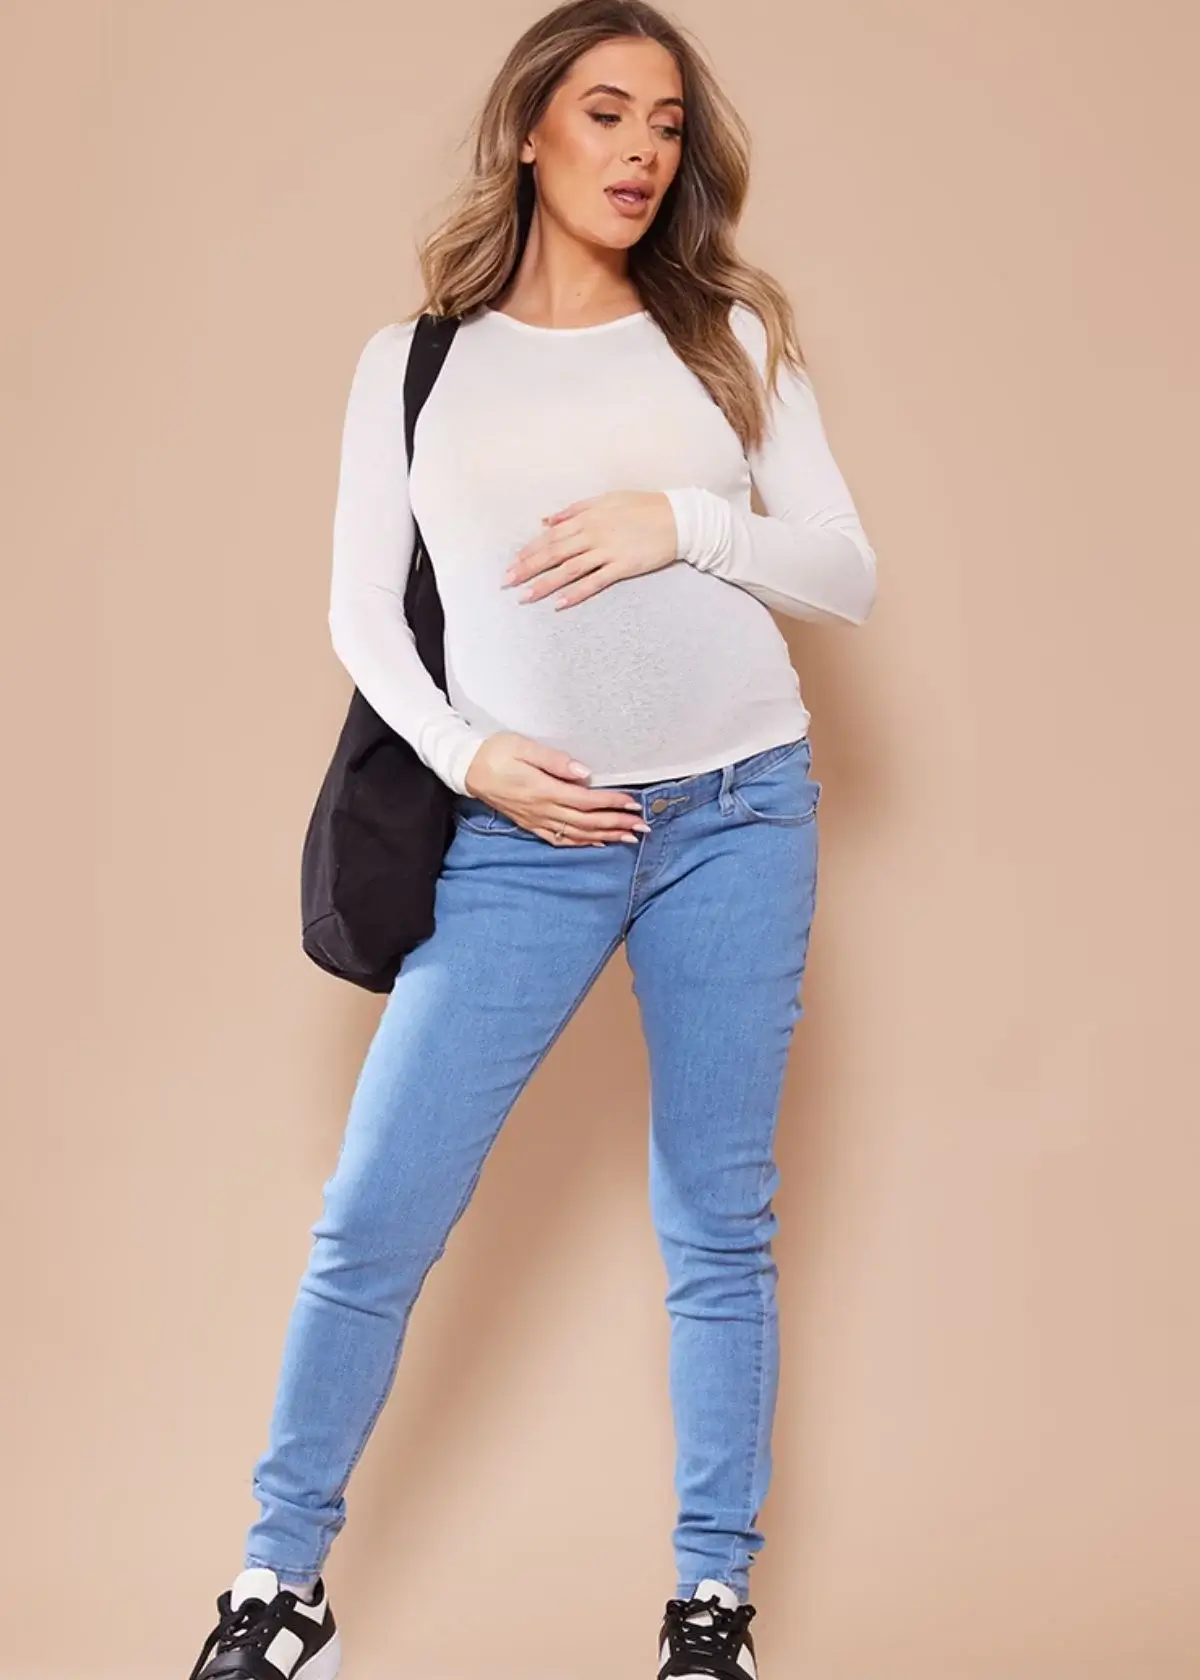 Are maternity jeans suitable for all stages of pregnancy?